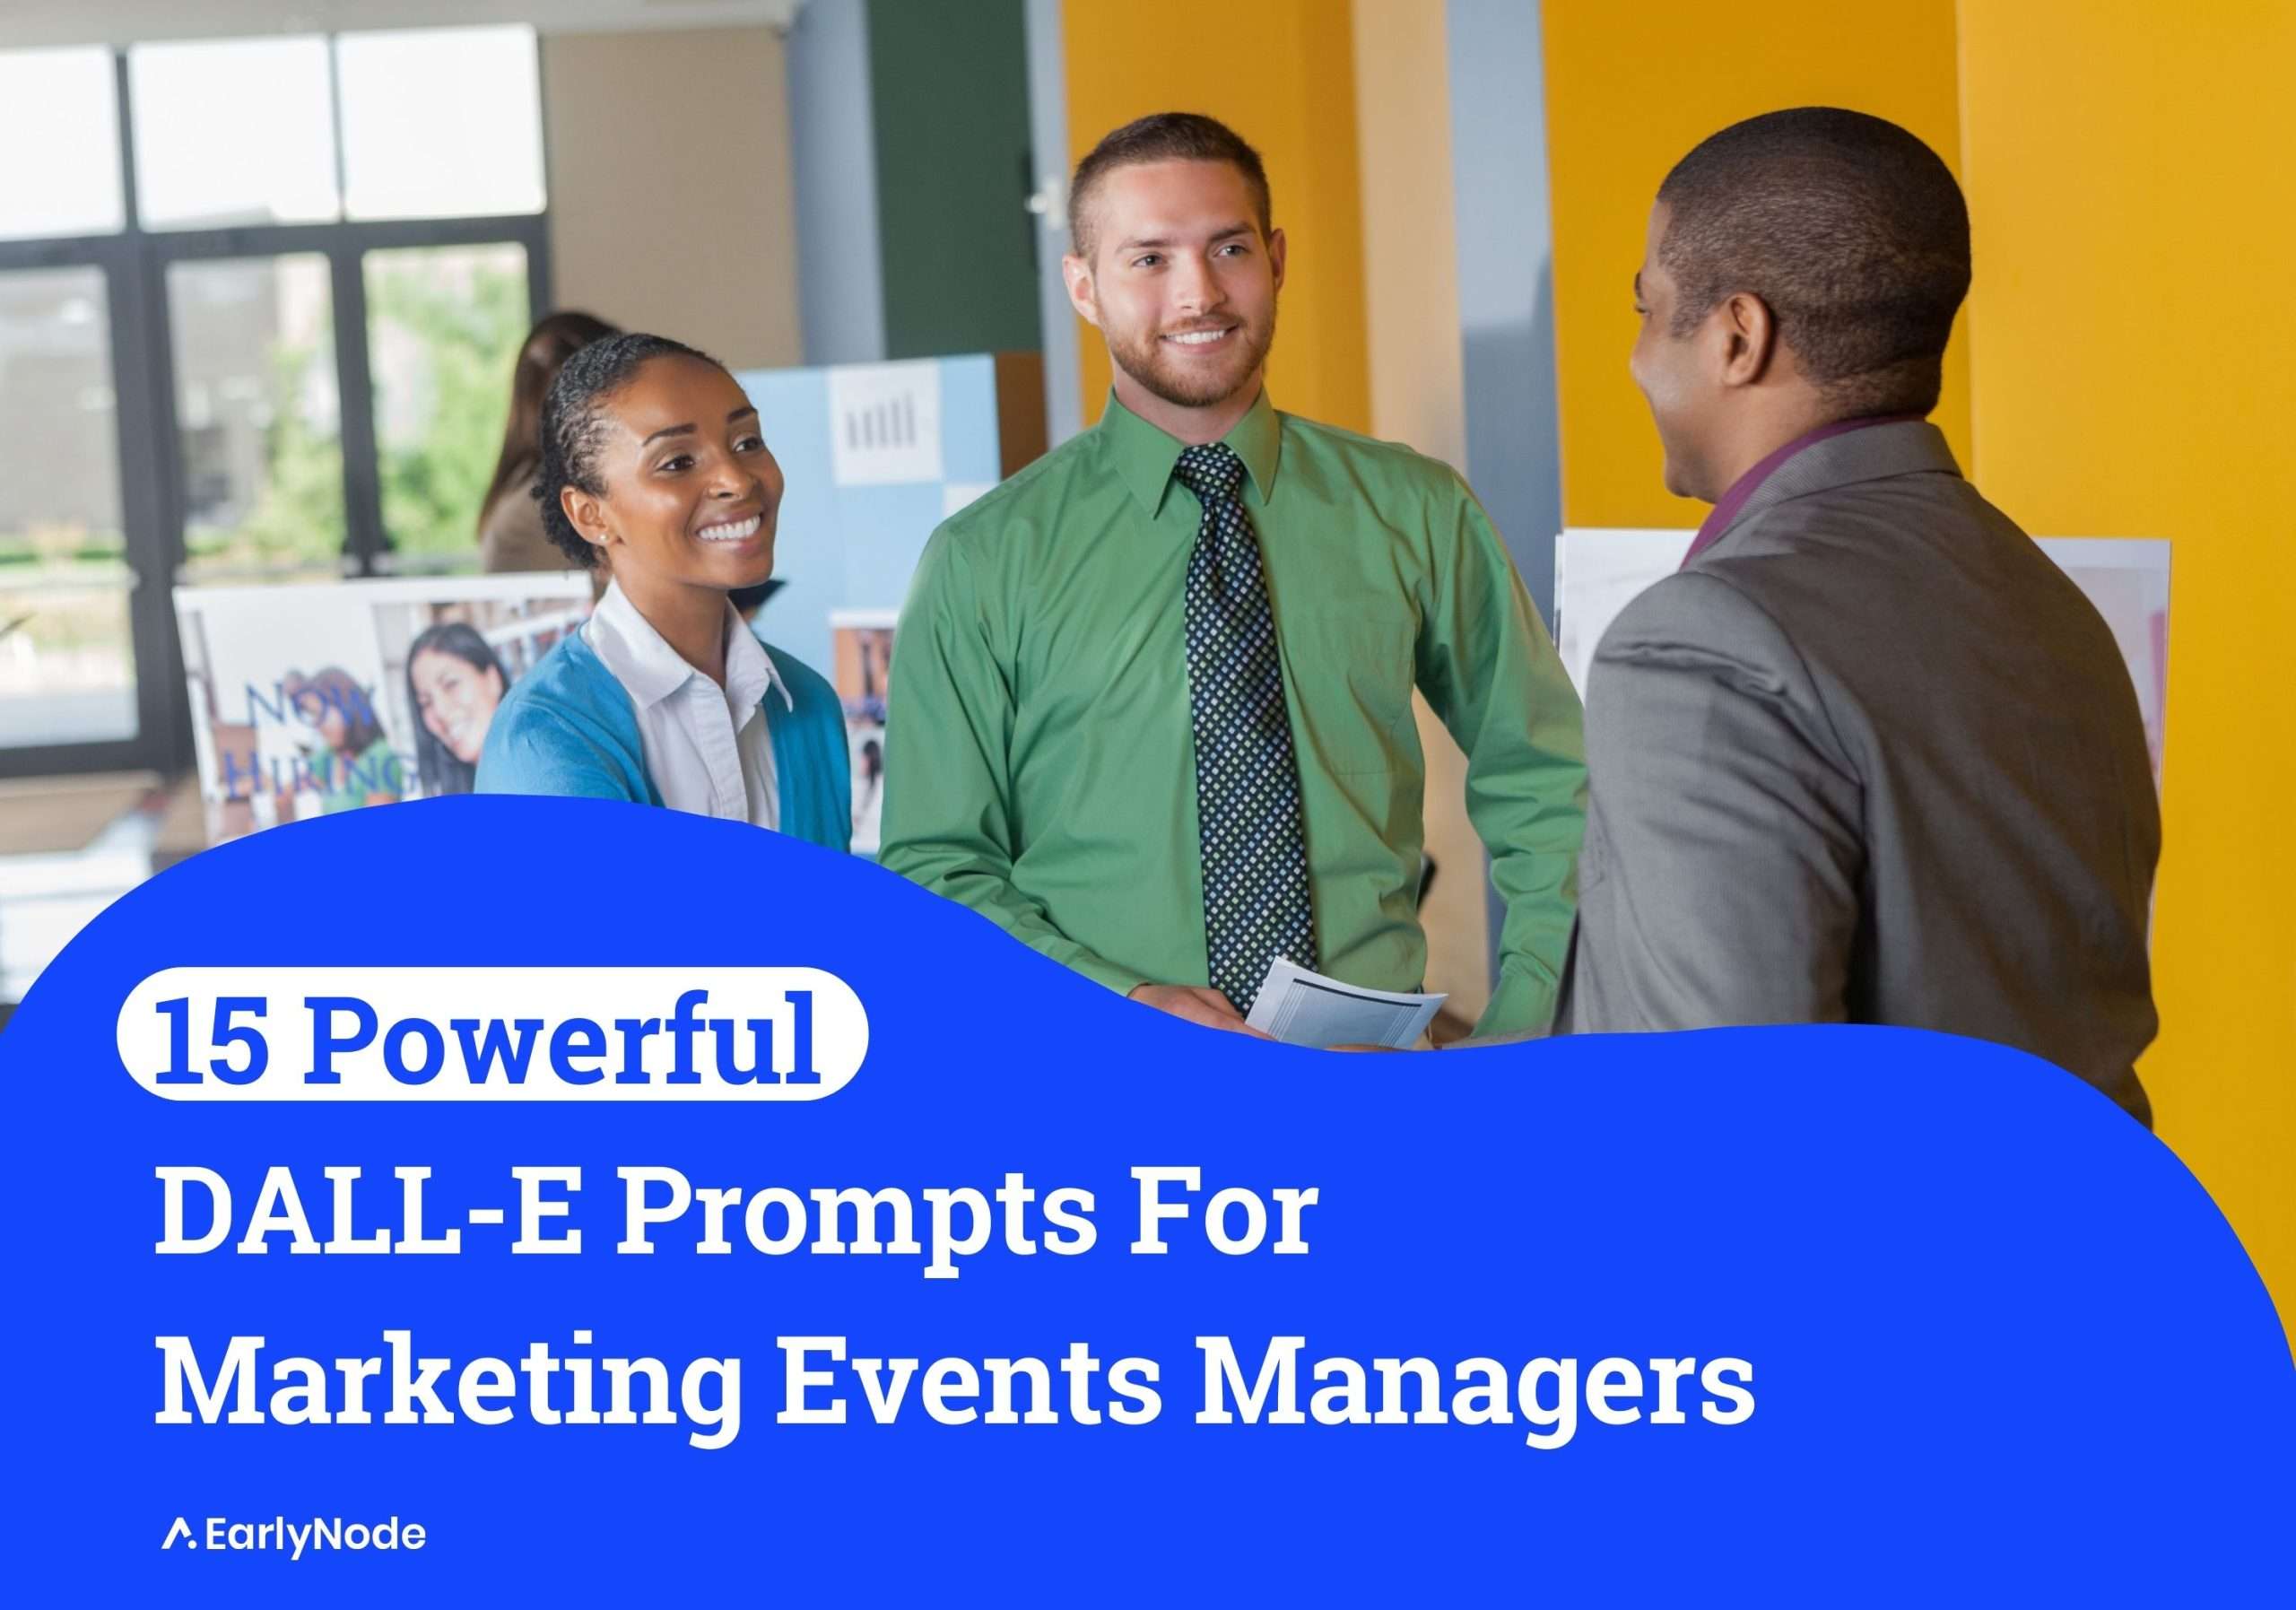 15+ Powerful DALL-E Prompts for Marketing Events Managers